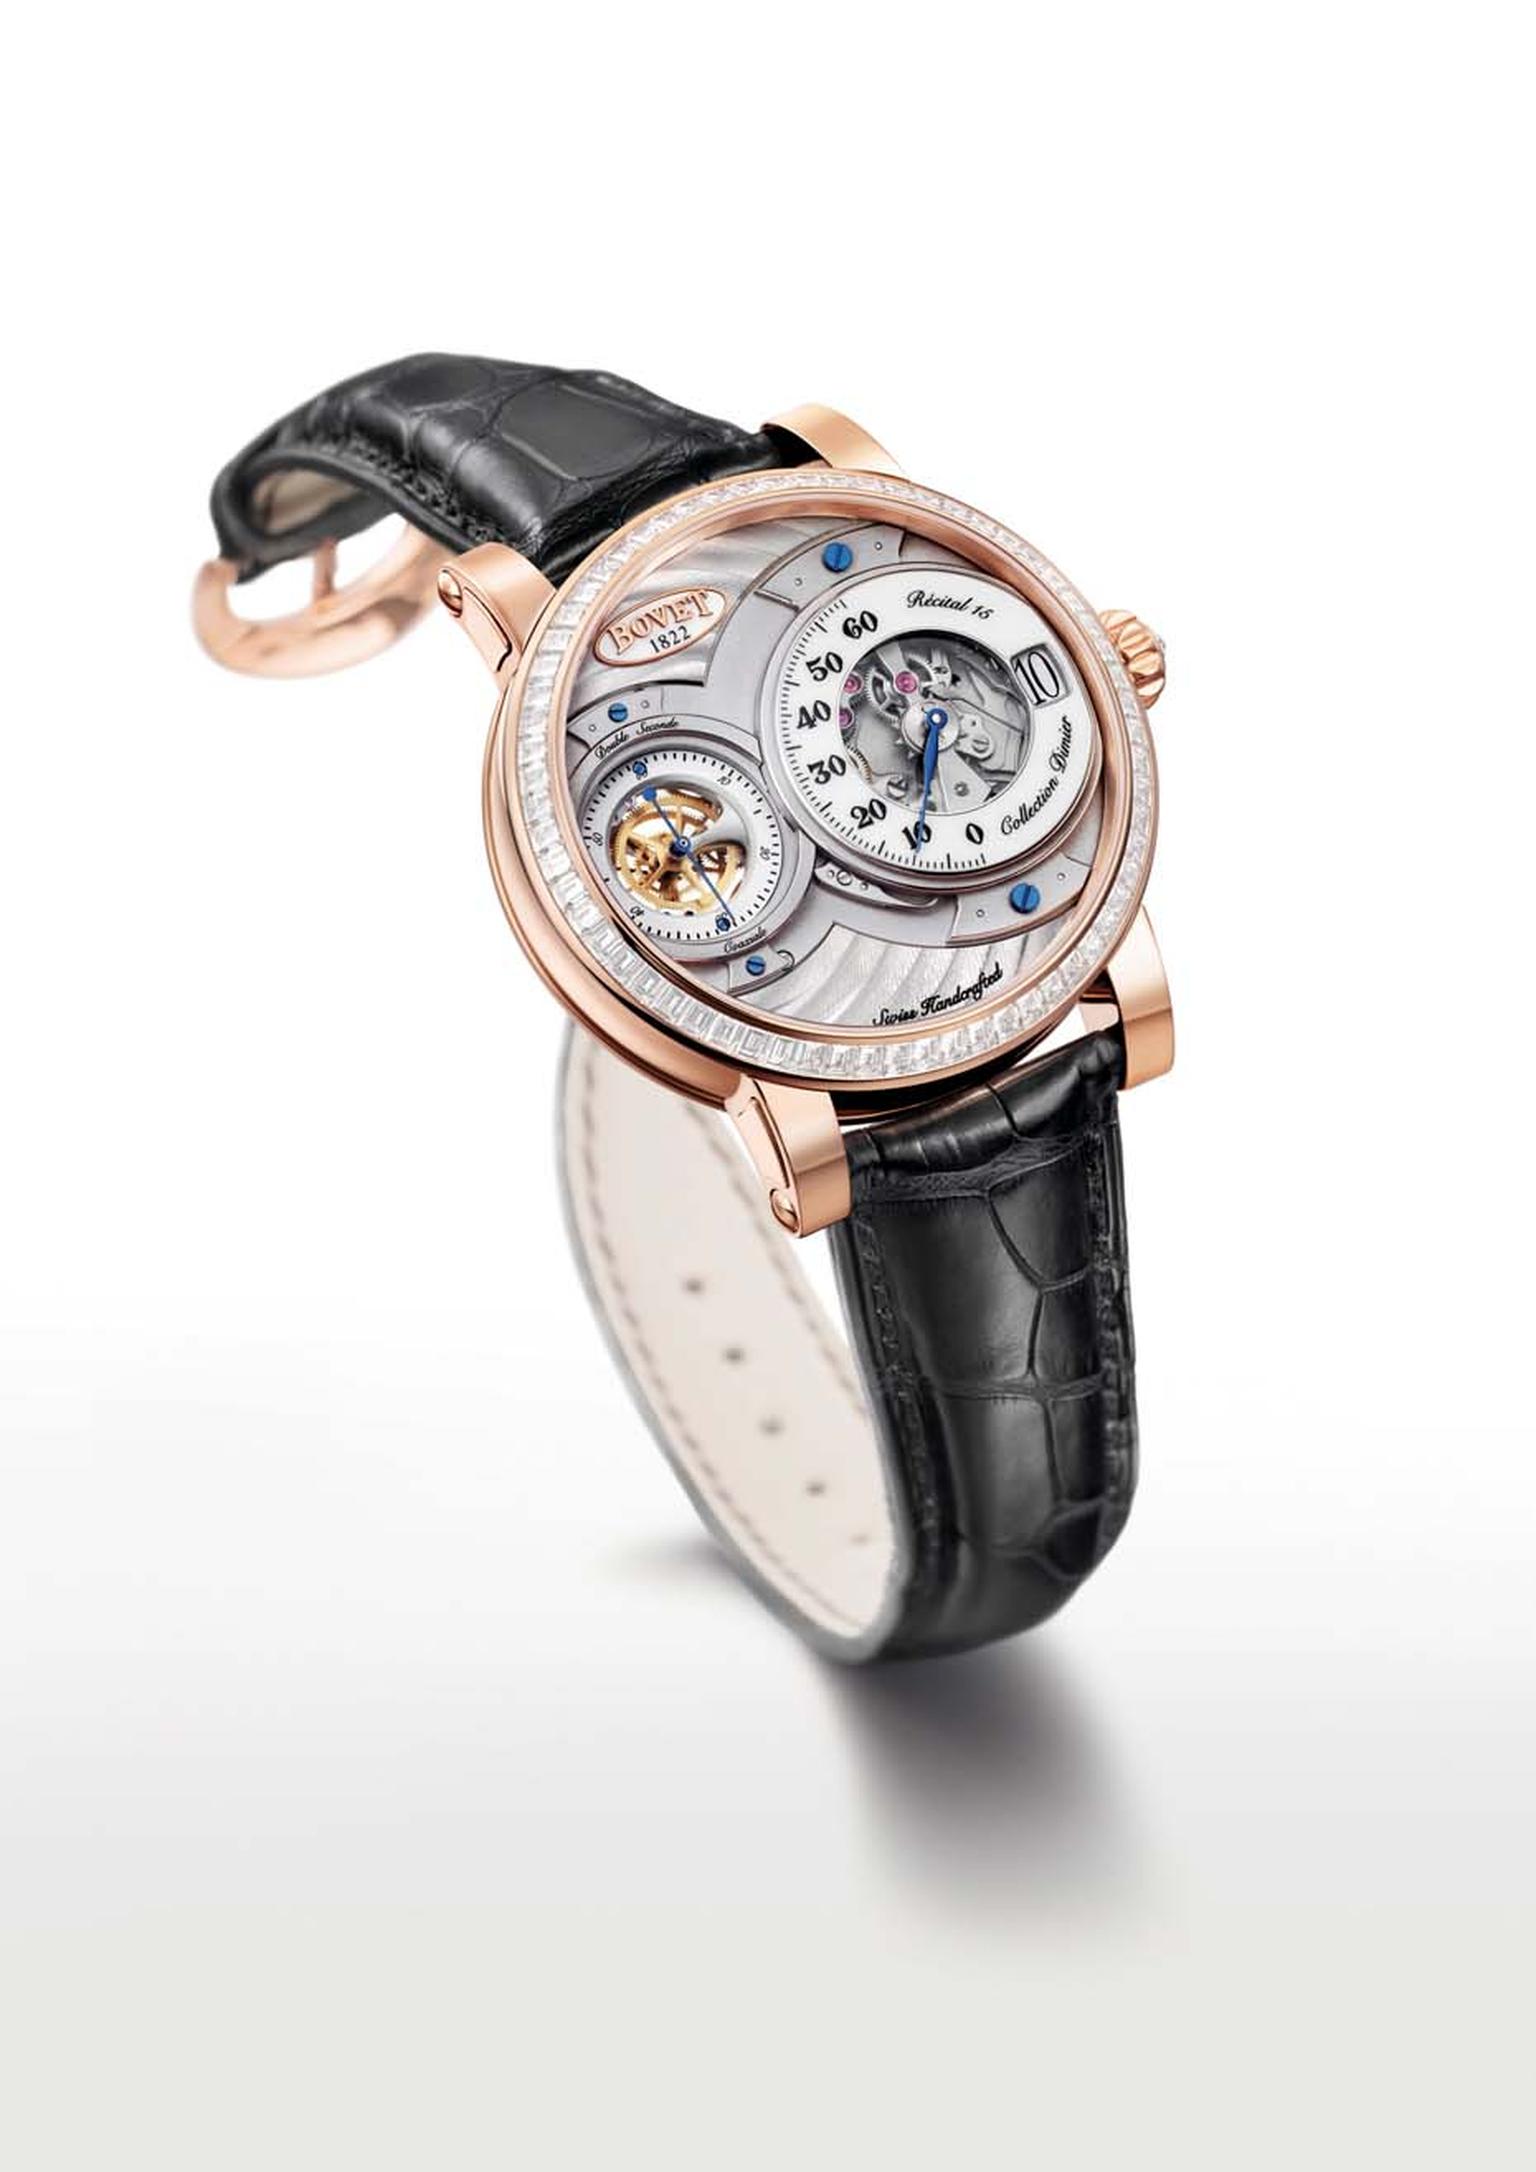 Also from the new 2014 collection is the Bovet Recital 15 Collection Dimier watch, which combines jumping hours and retrograde minutes.